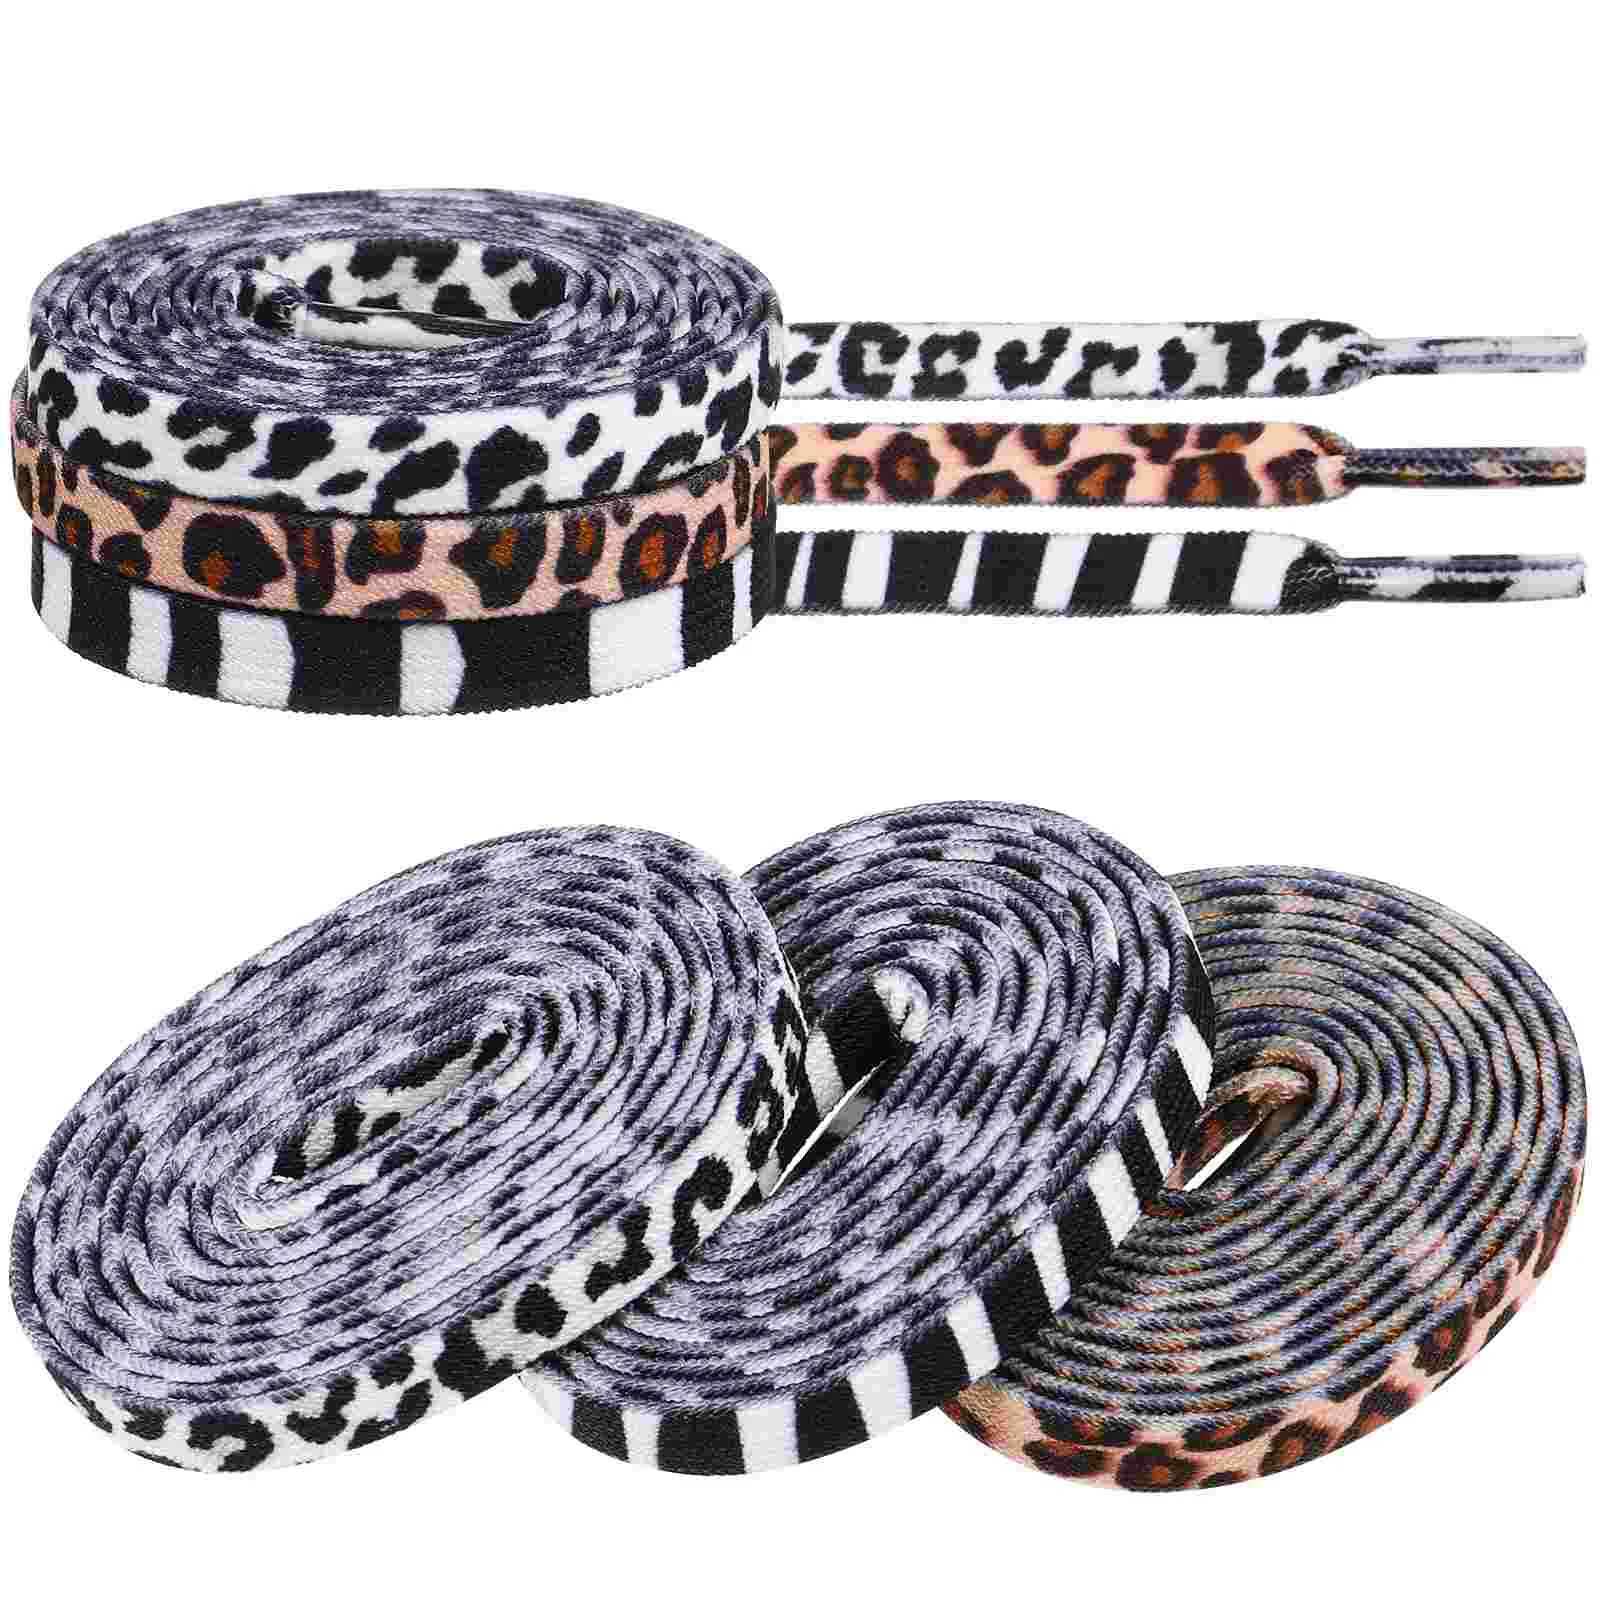 

3 Pairs White Shoe Laces Shoelace Footwear Printing Shoelaces Lace-up Shoes Ties Leisure Child